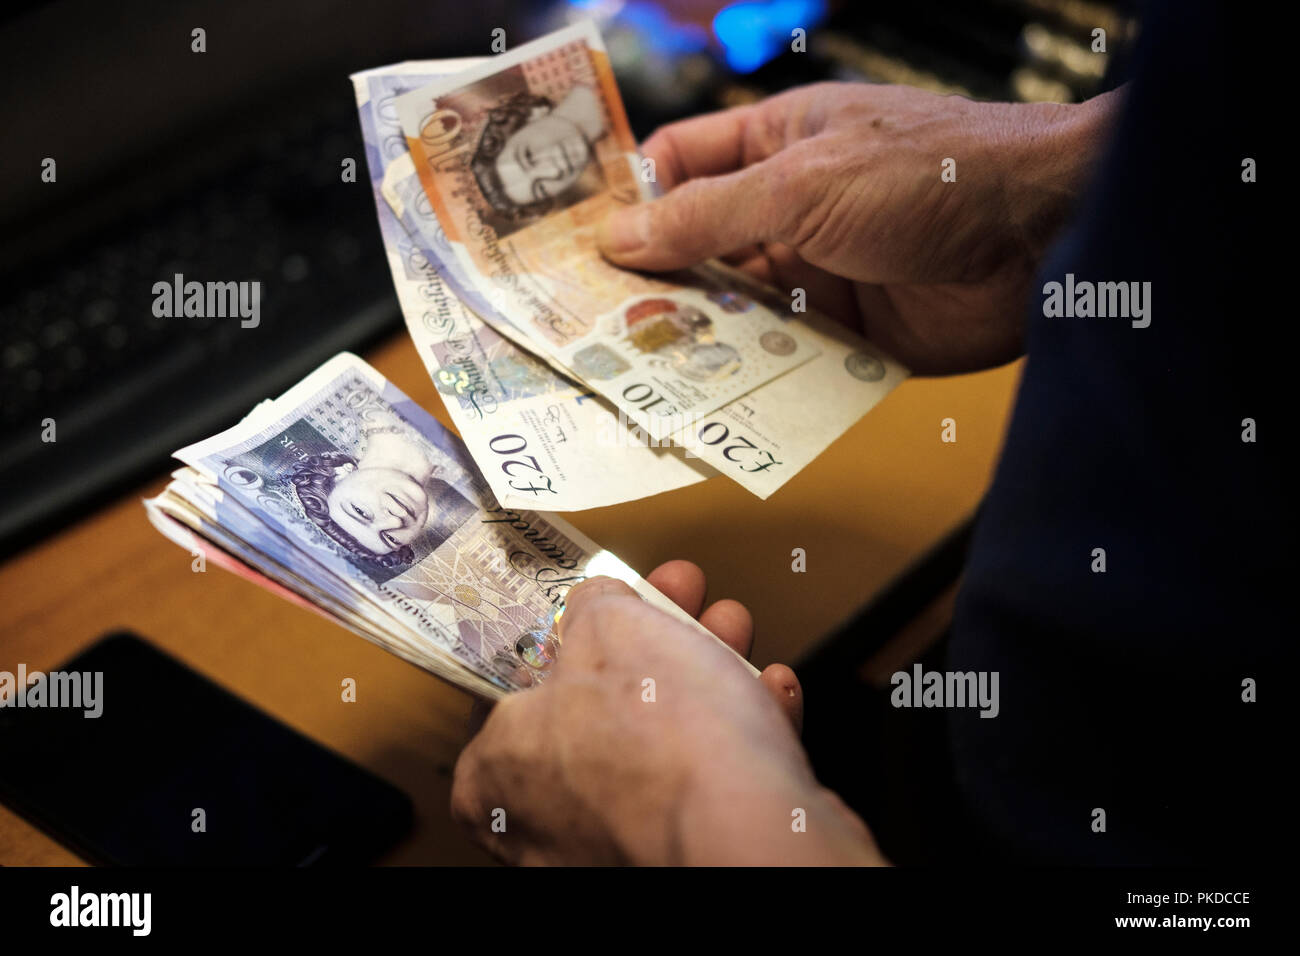 Counting  cash-Pound sterling Banknotes Stock Photo